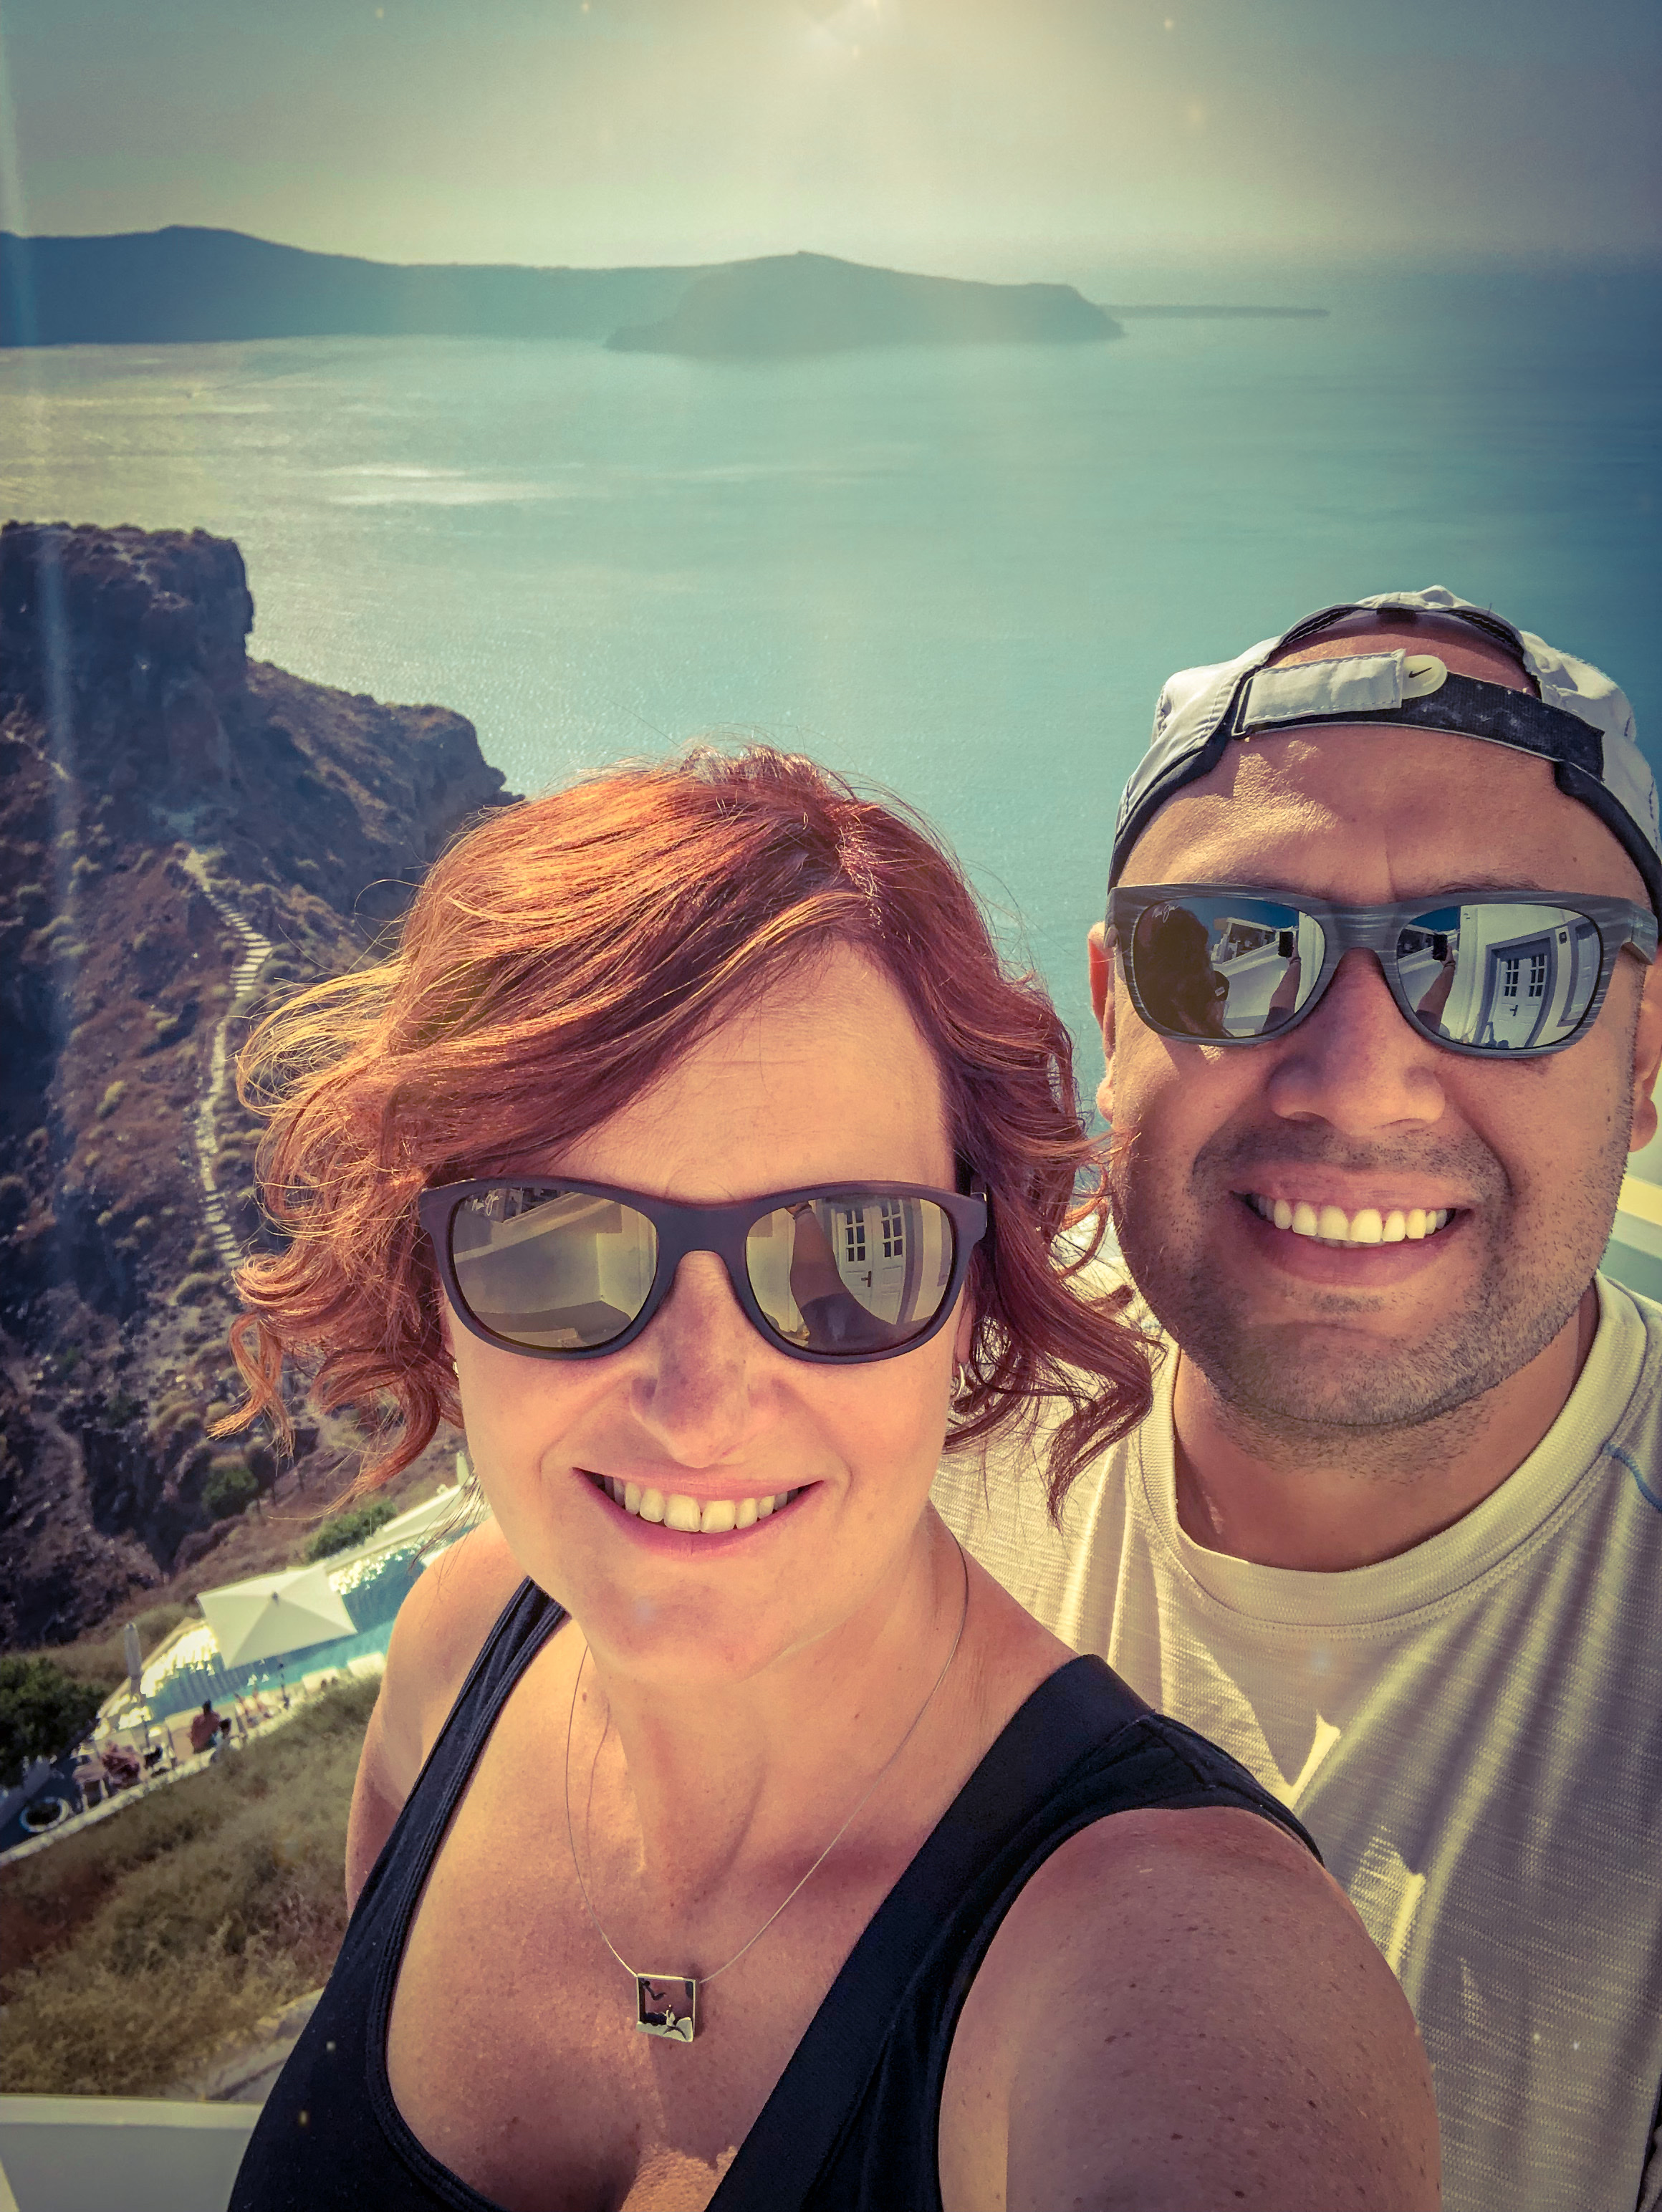 Armando and Tamara in Santorini, Greece with a view of Skaros Rock and the Aegean Sea in the background.